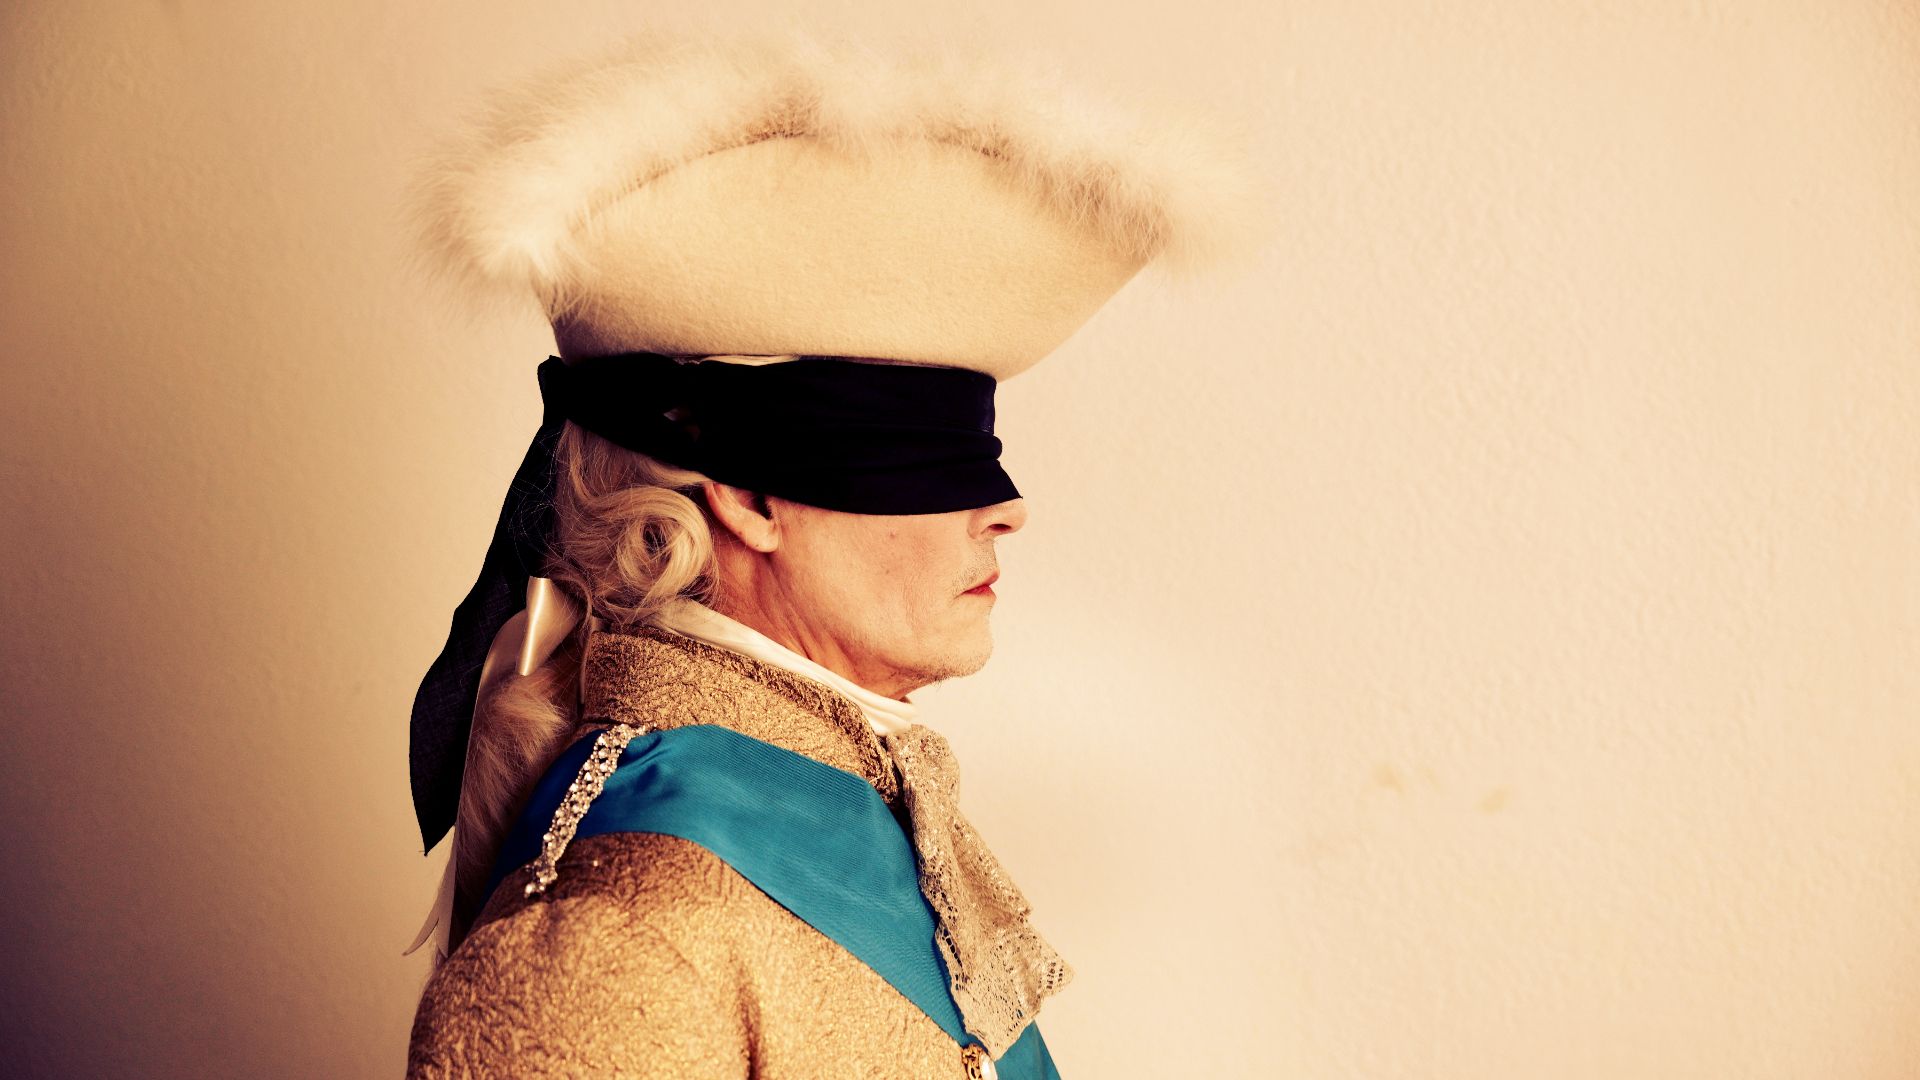 Johnny Depp in a blindfold as King Louis XV in the movie Jeanne du Barry